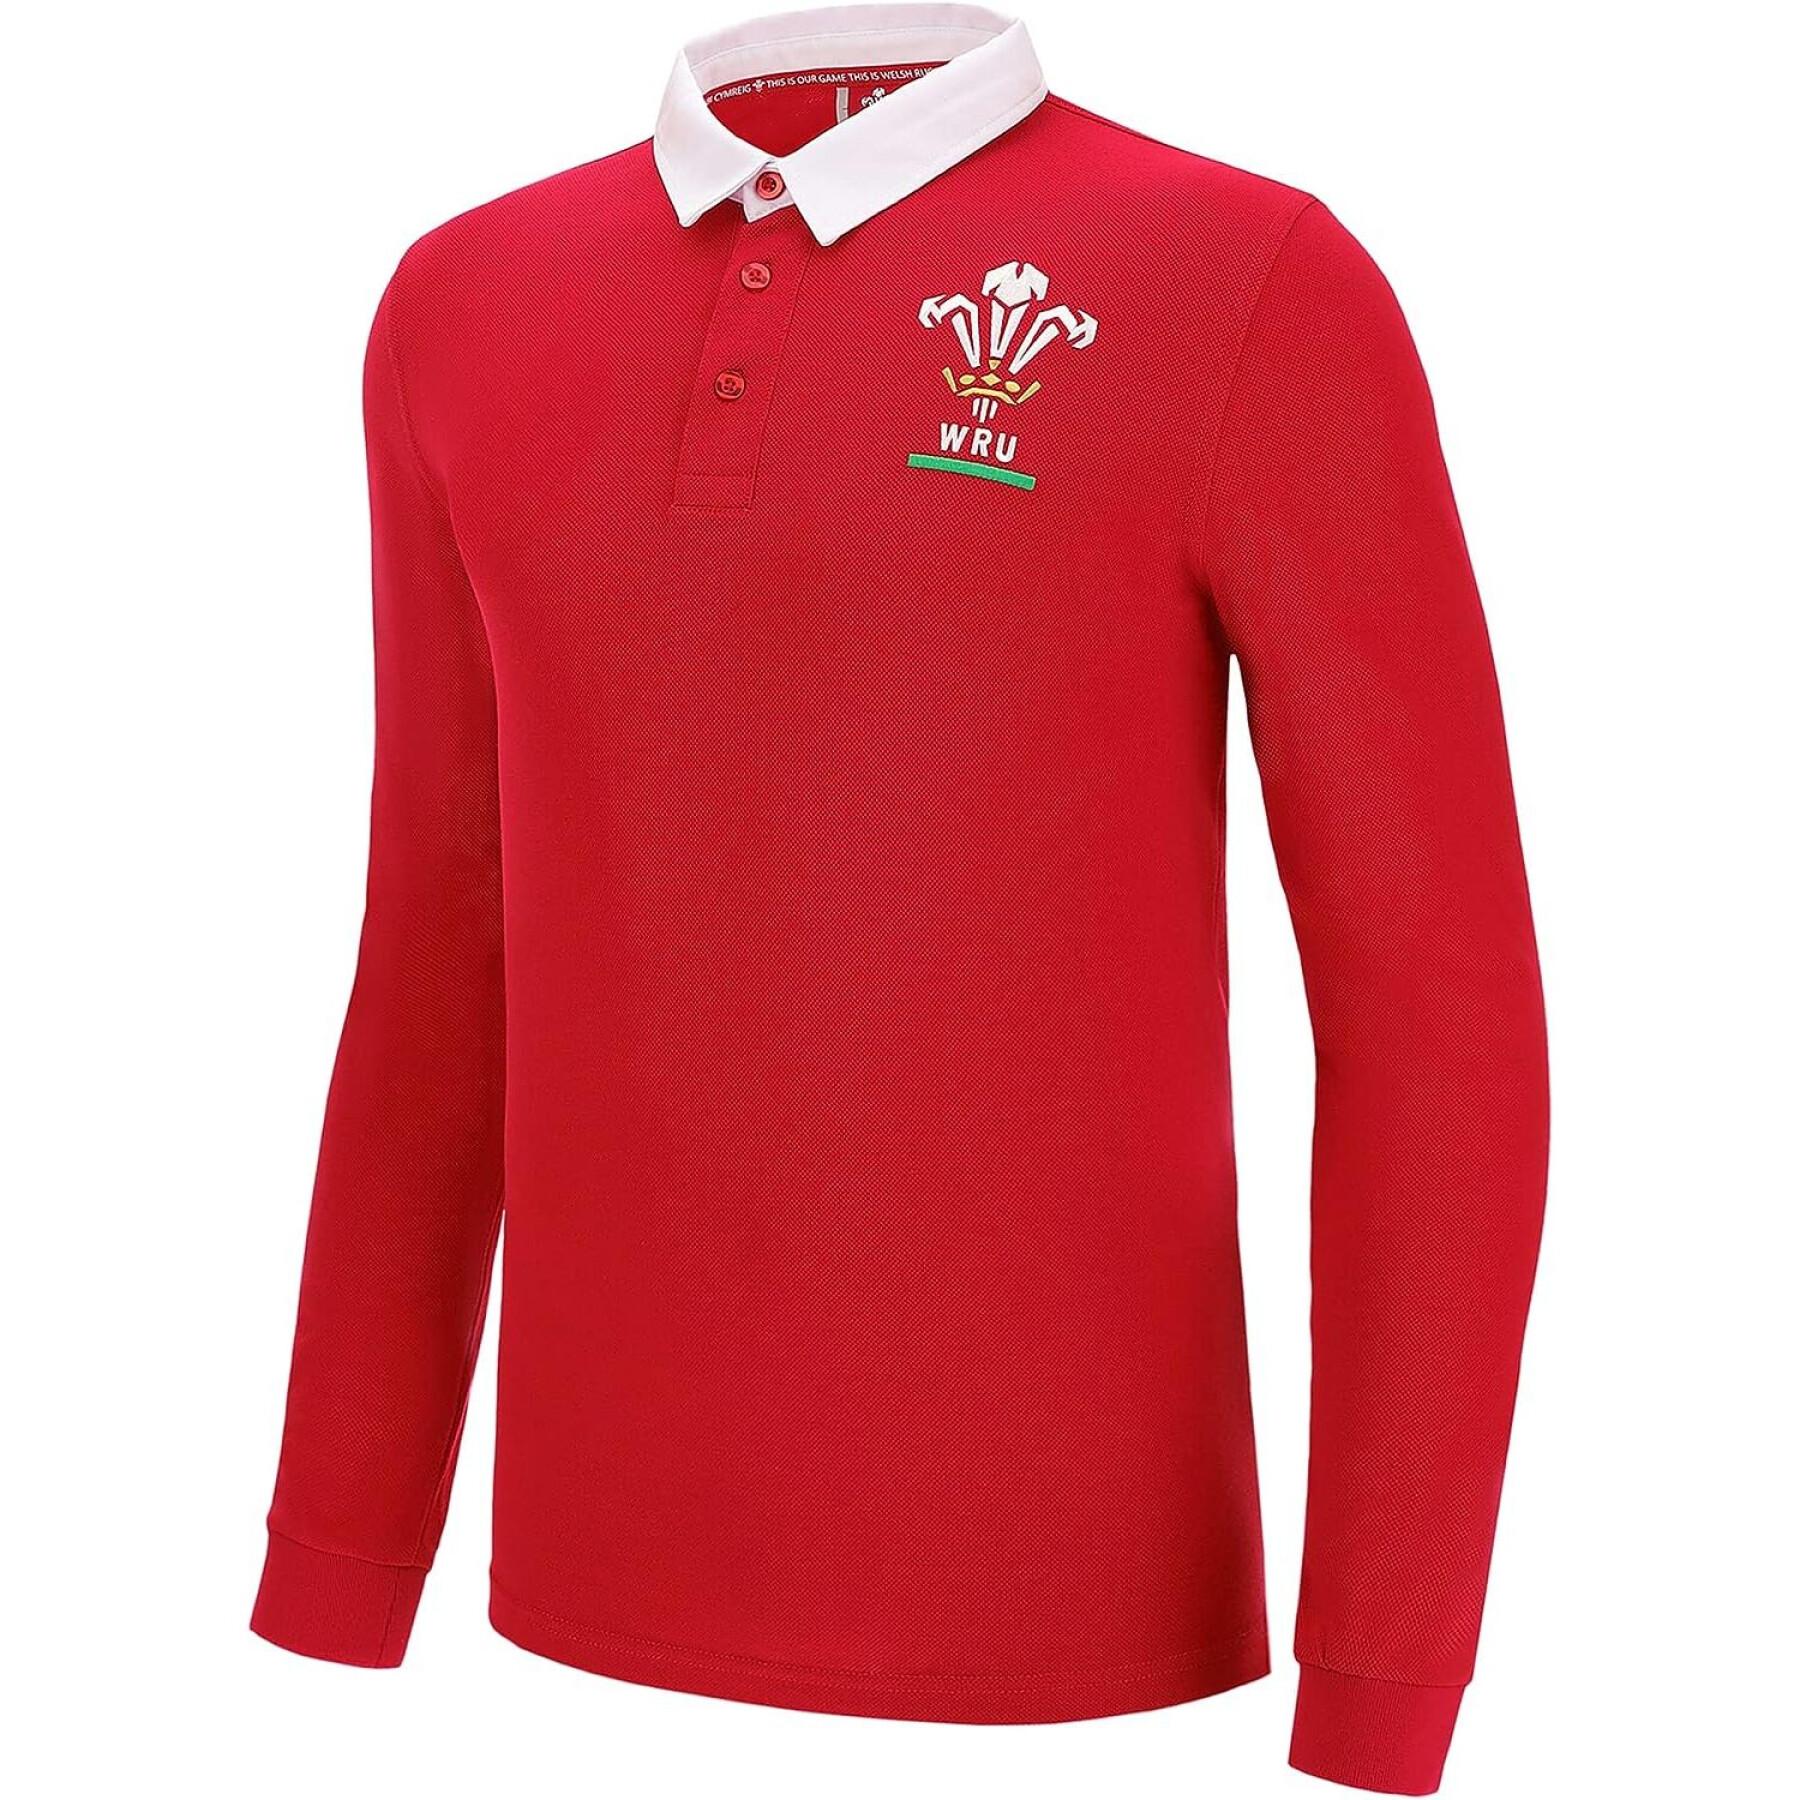 Maillot manches longues Pays de Galles Rugby XV Merch CA